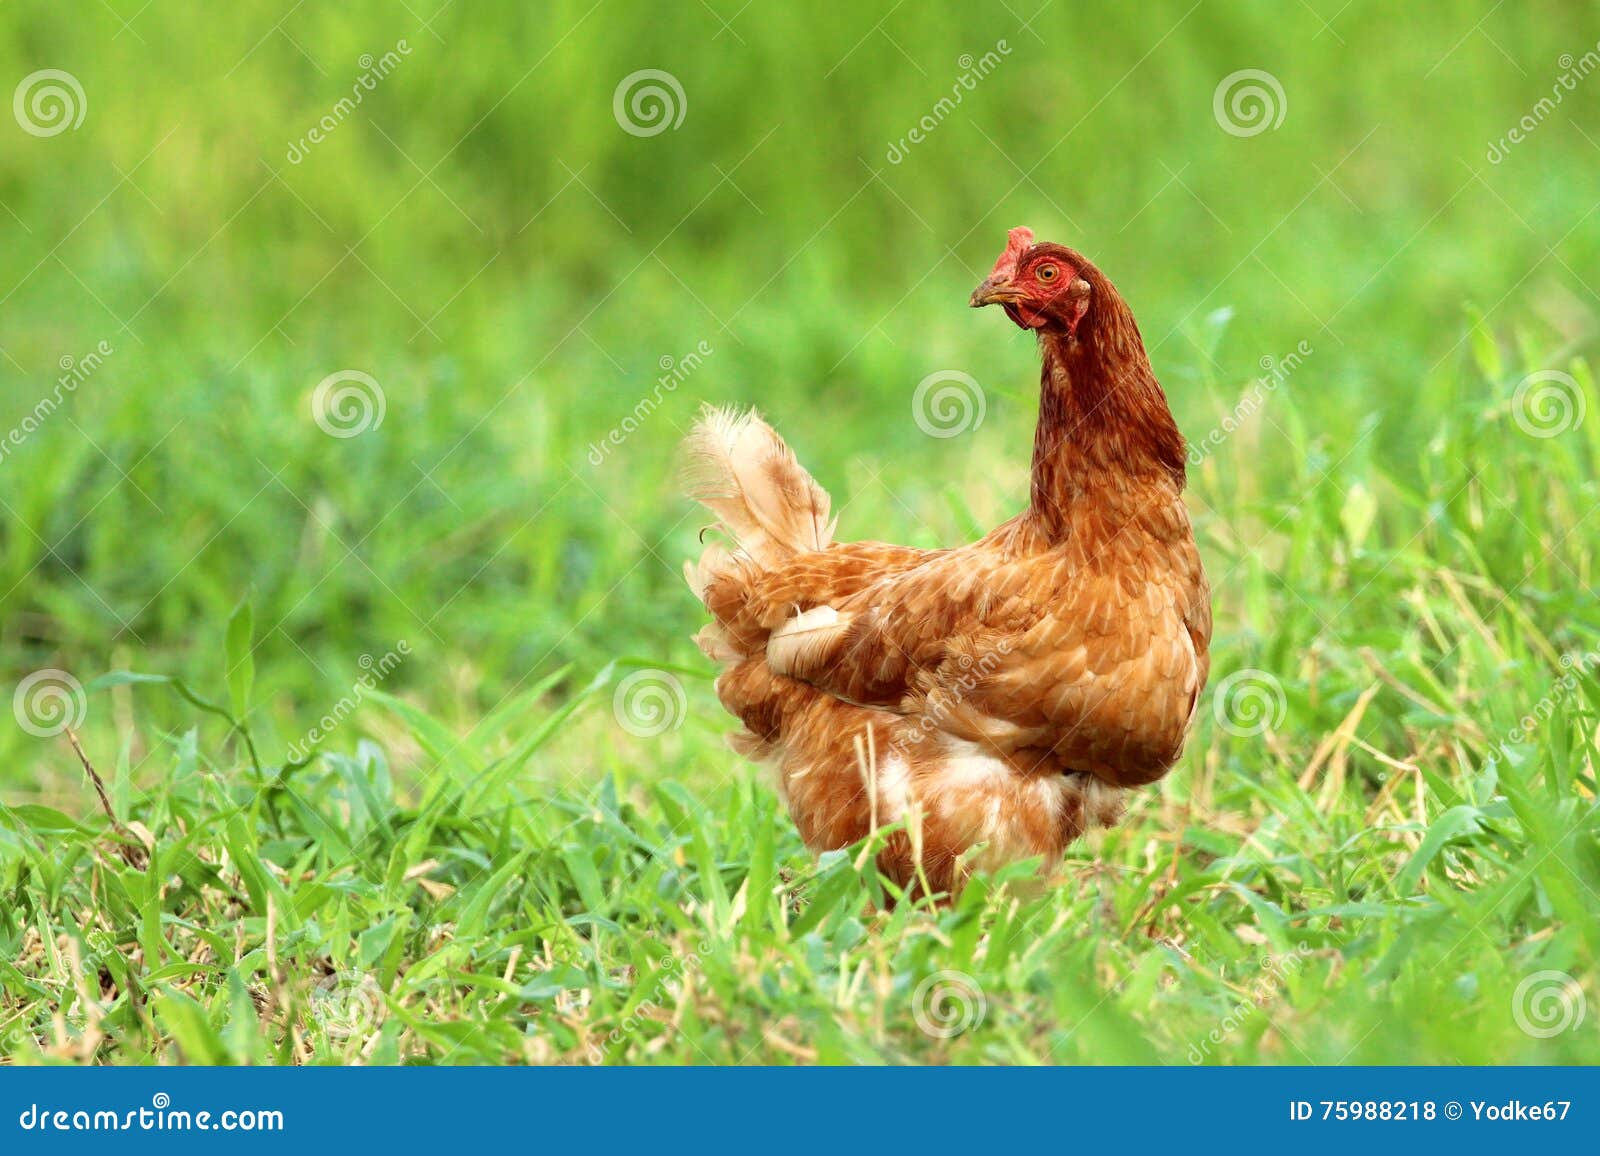 image of red hen.